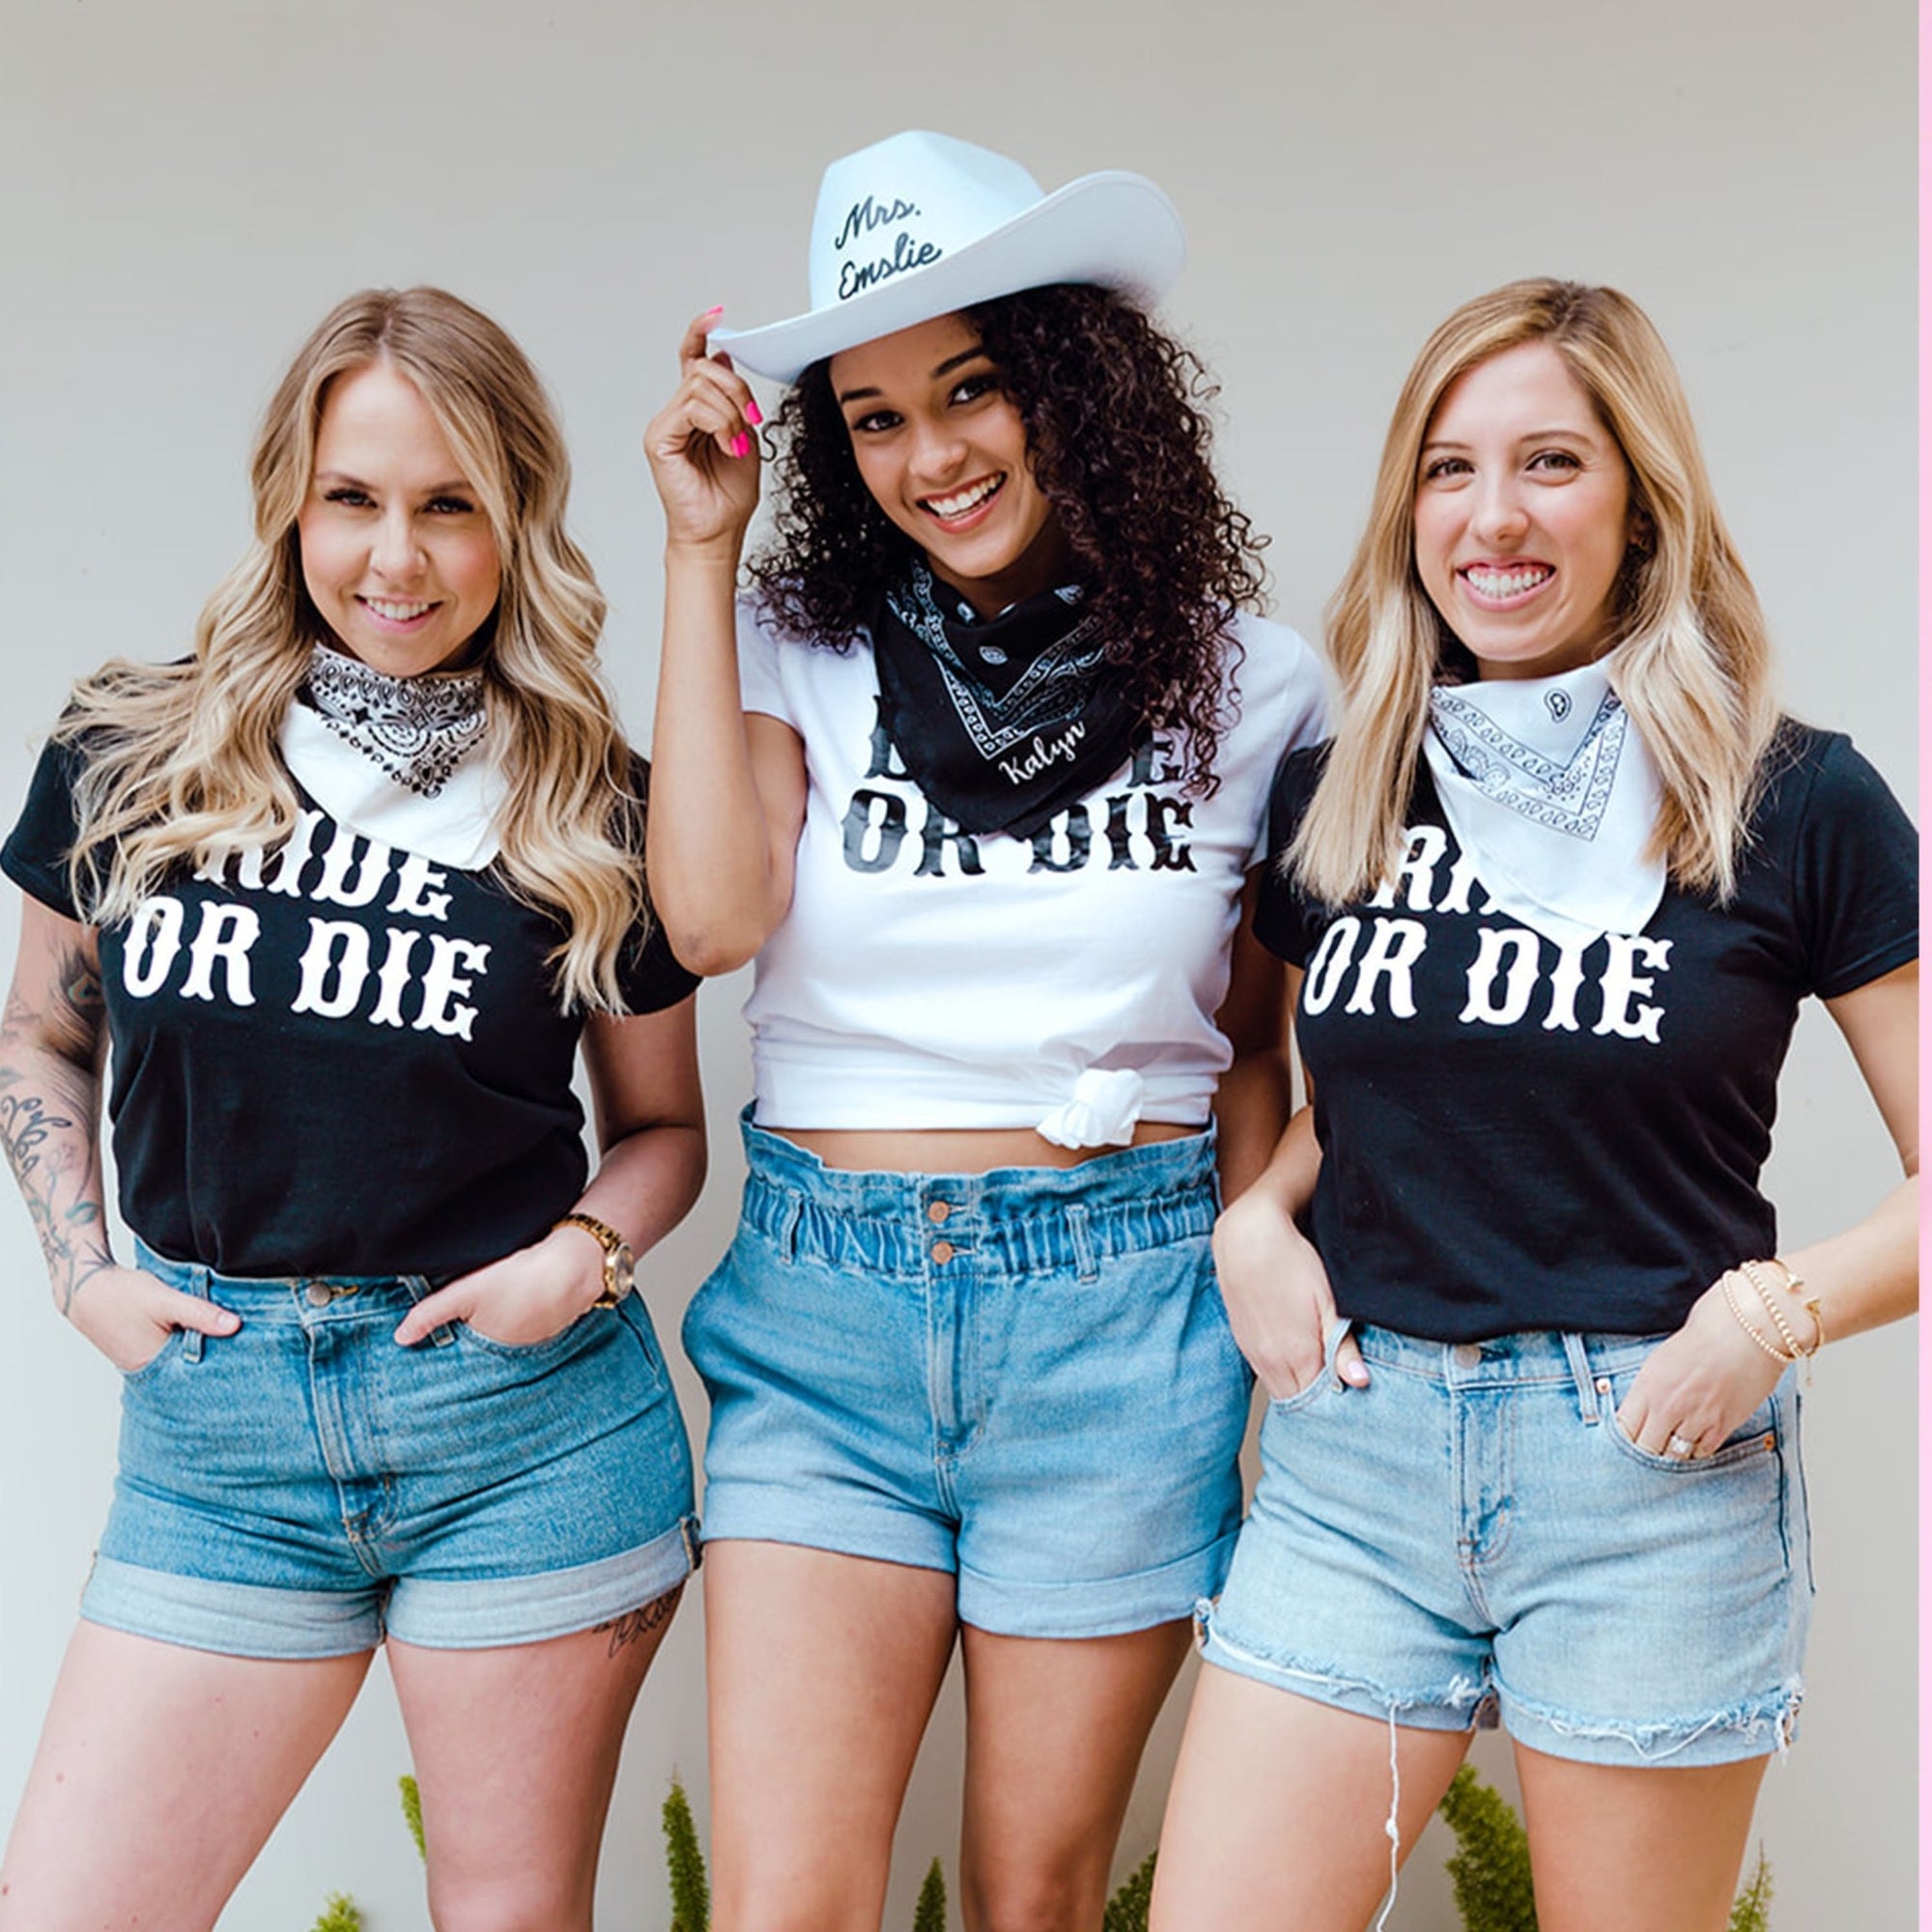 A bride and her friends wear matching bachelorette shirts which say "Bride or Die" and bandanas.